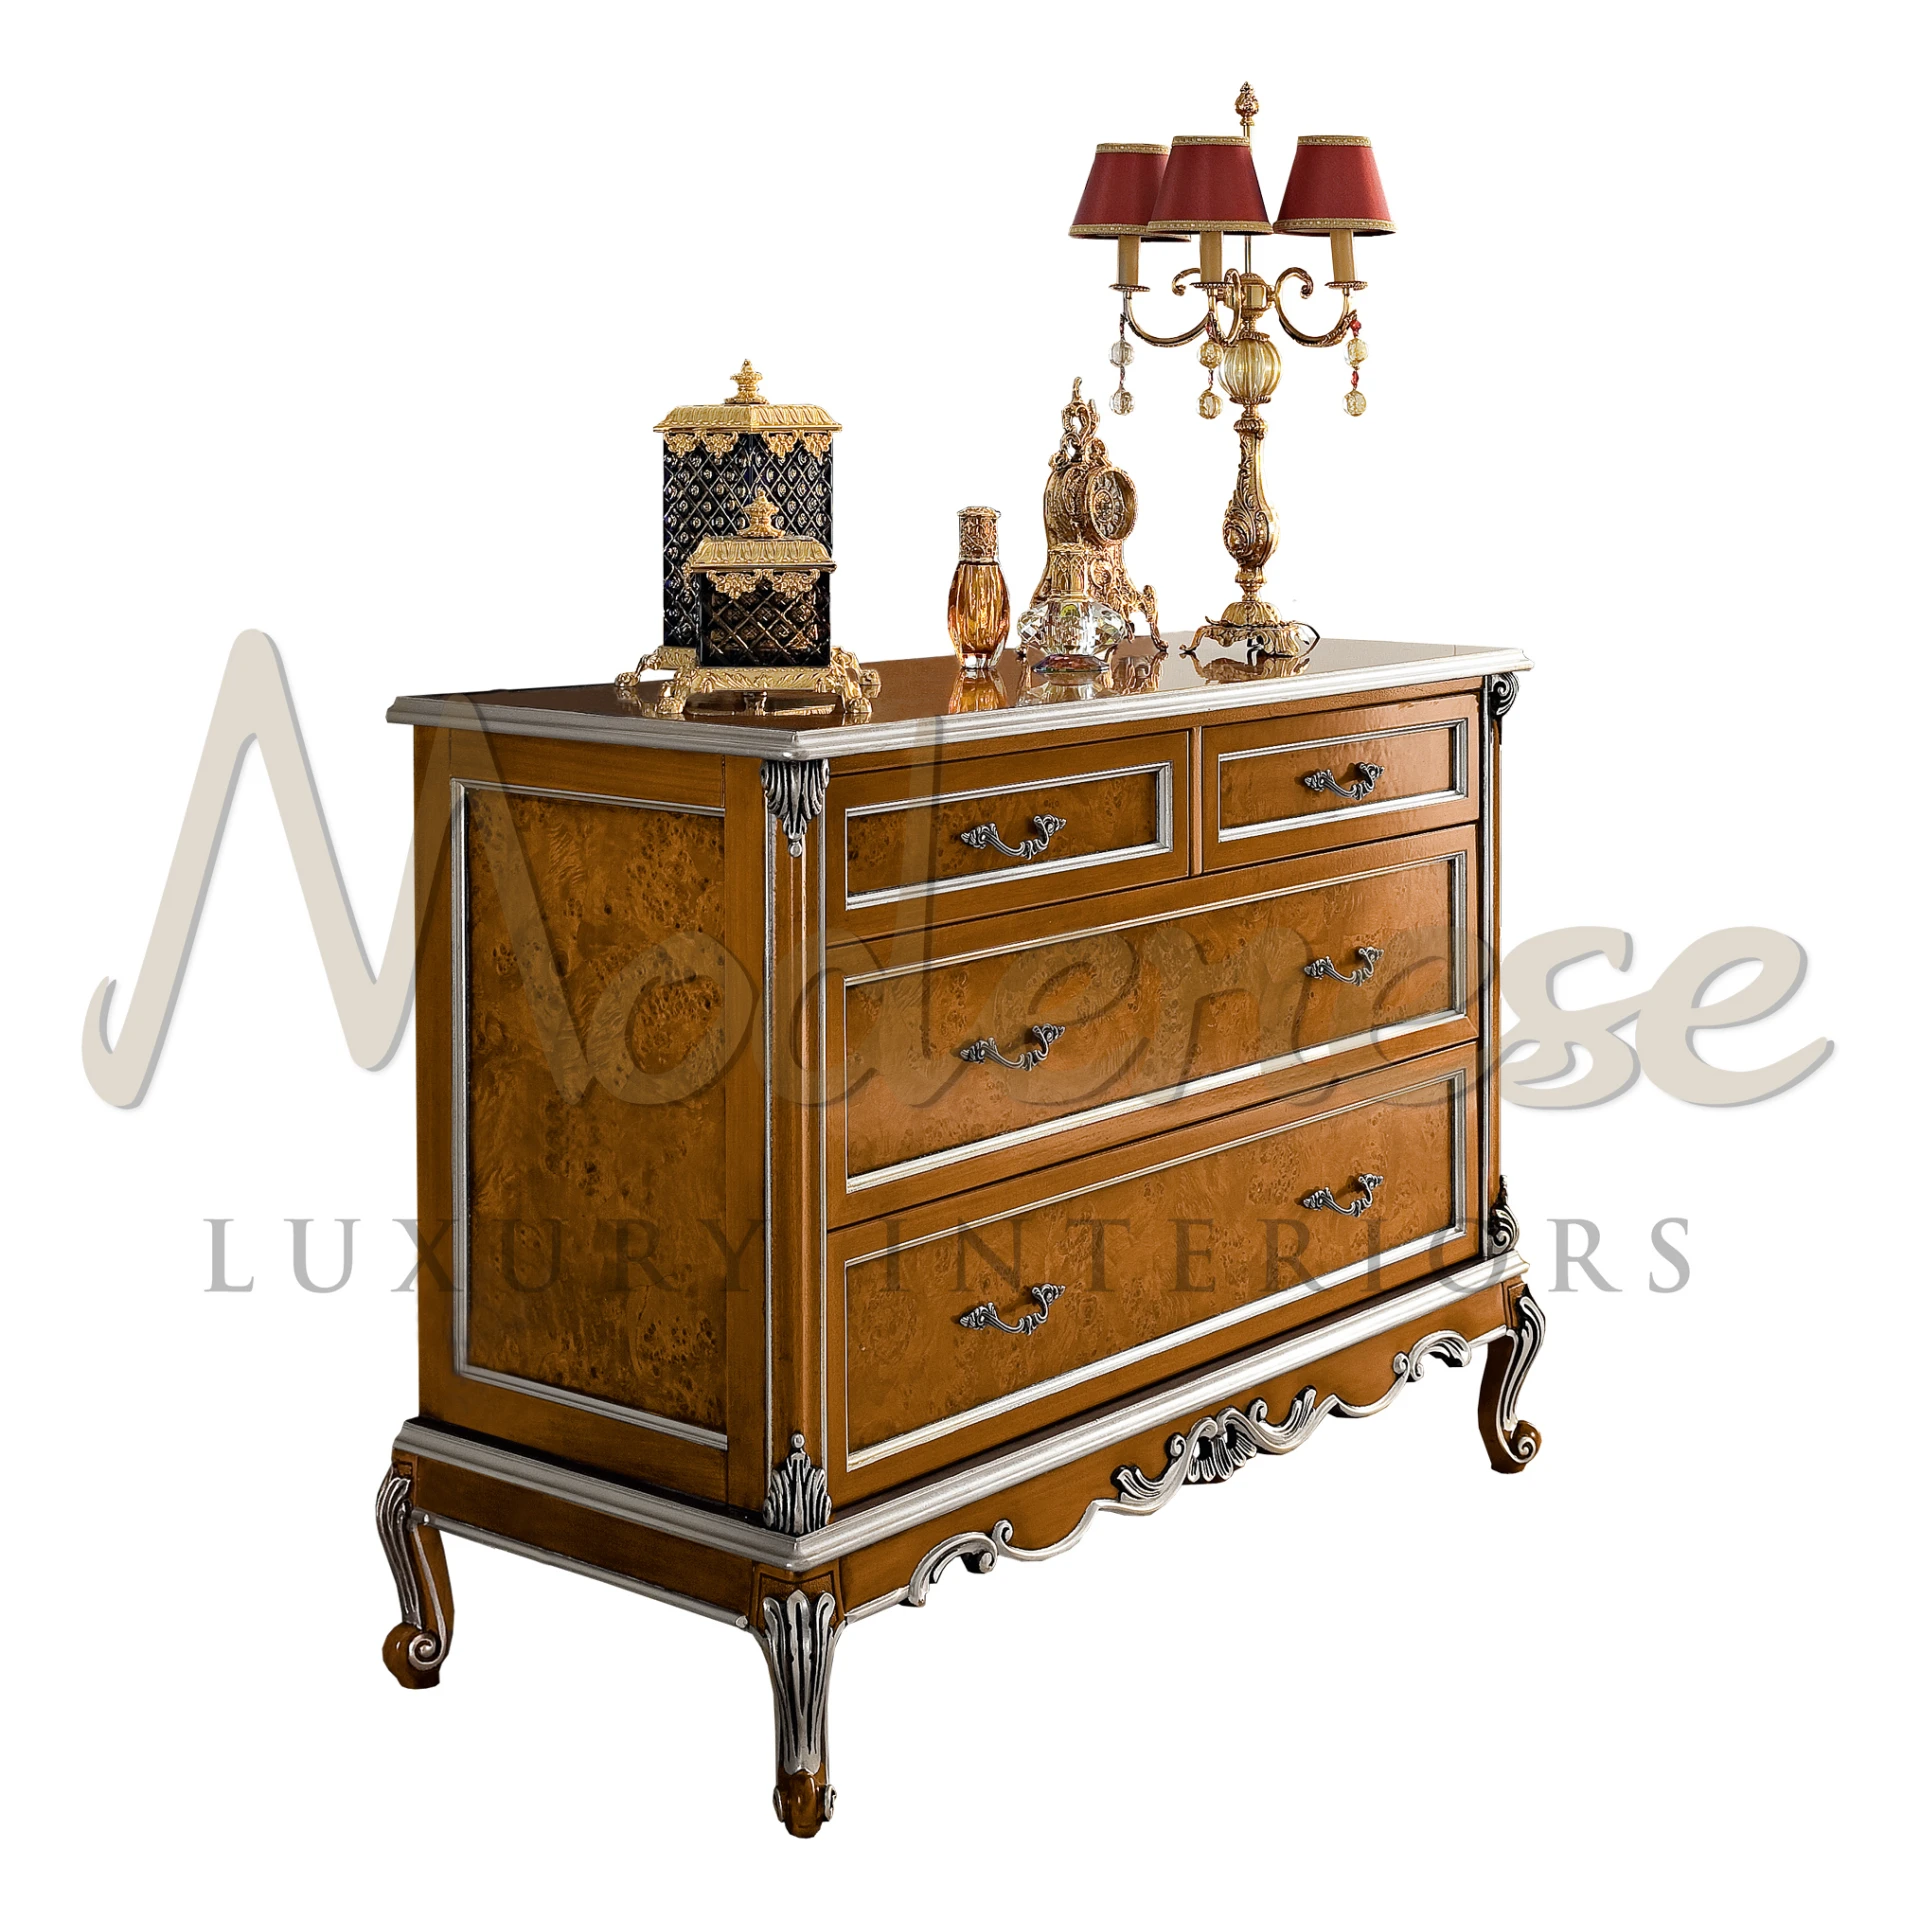 Traditional burl wood dresser with ornate silver handles and a decorative tabletop display.